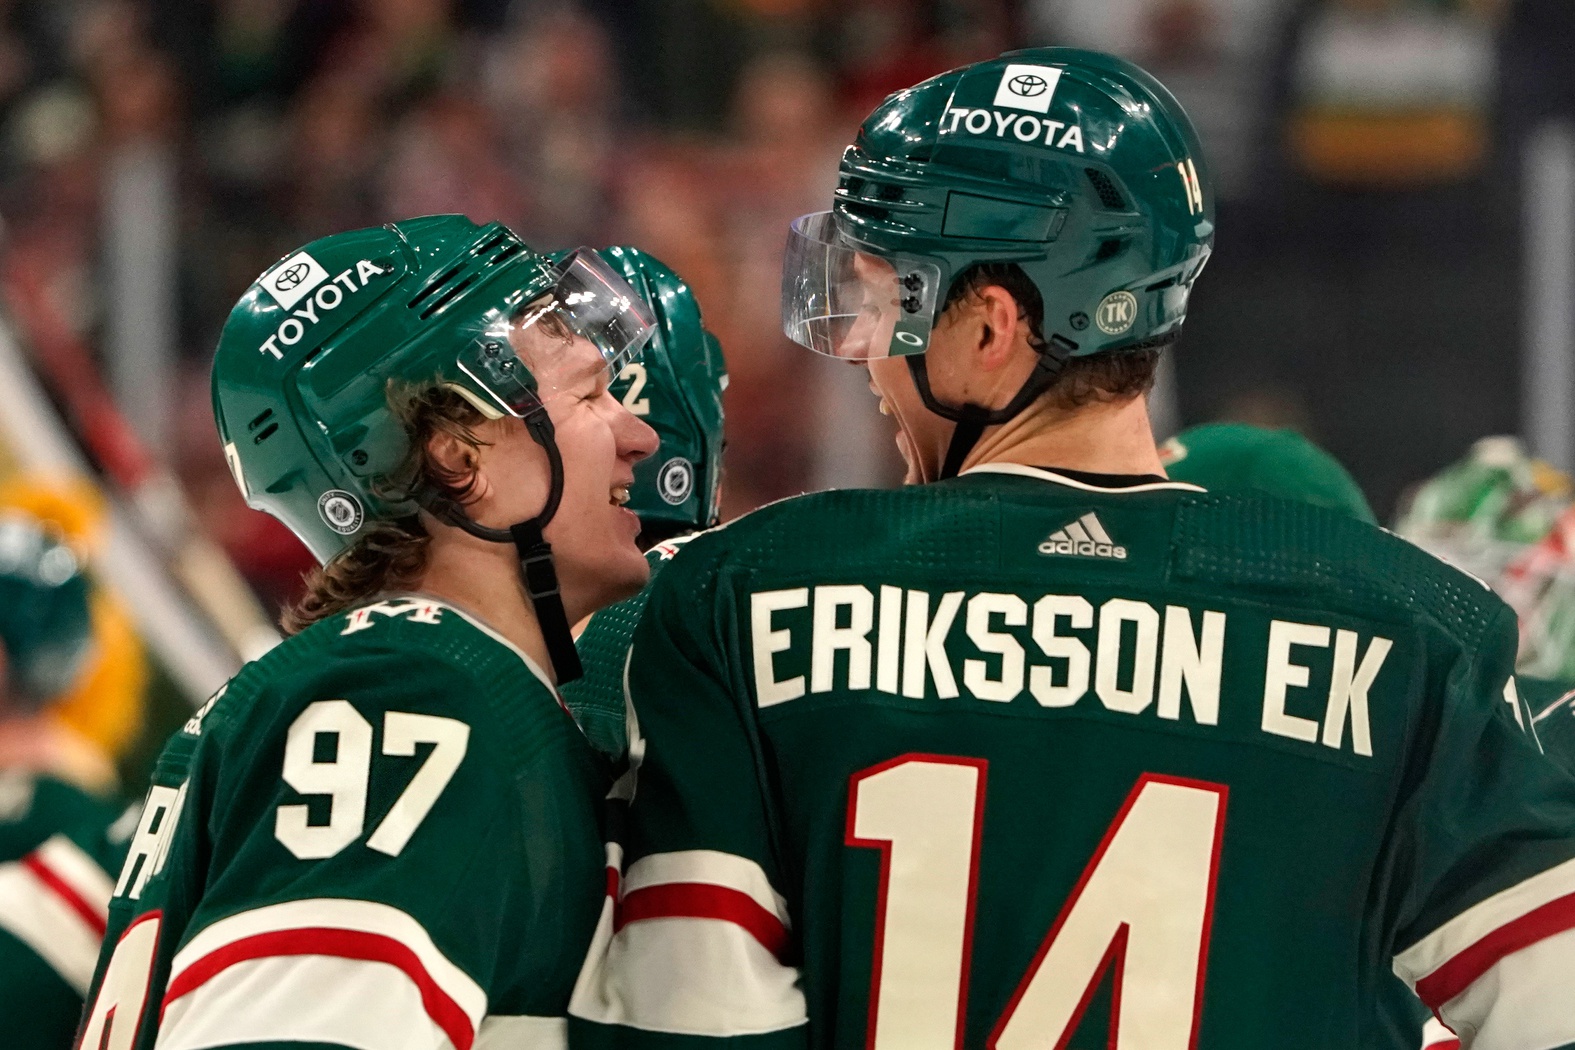 Assigning Every Wild Player to a Minnesota High School team - 10,000 Takes